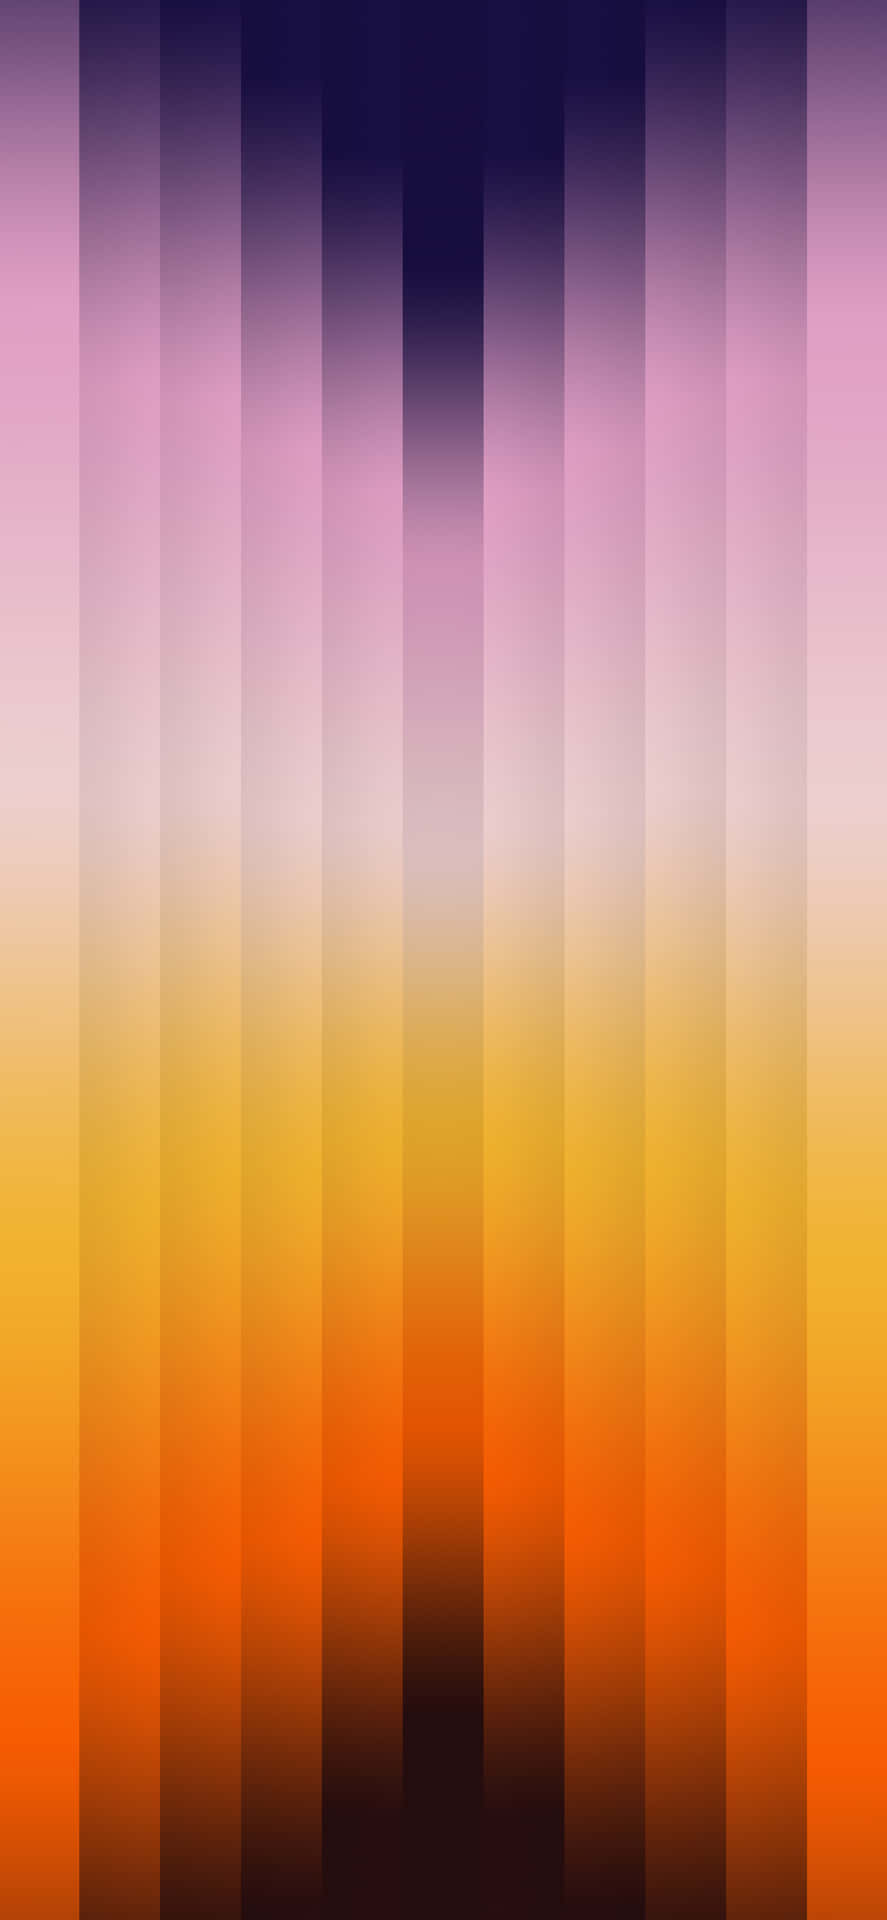 A Colorful Abstract Background With Orange, Yellow And Blue Stripes Wallpaper